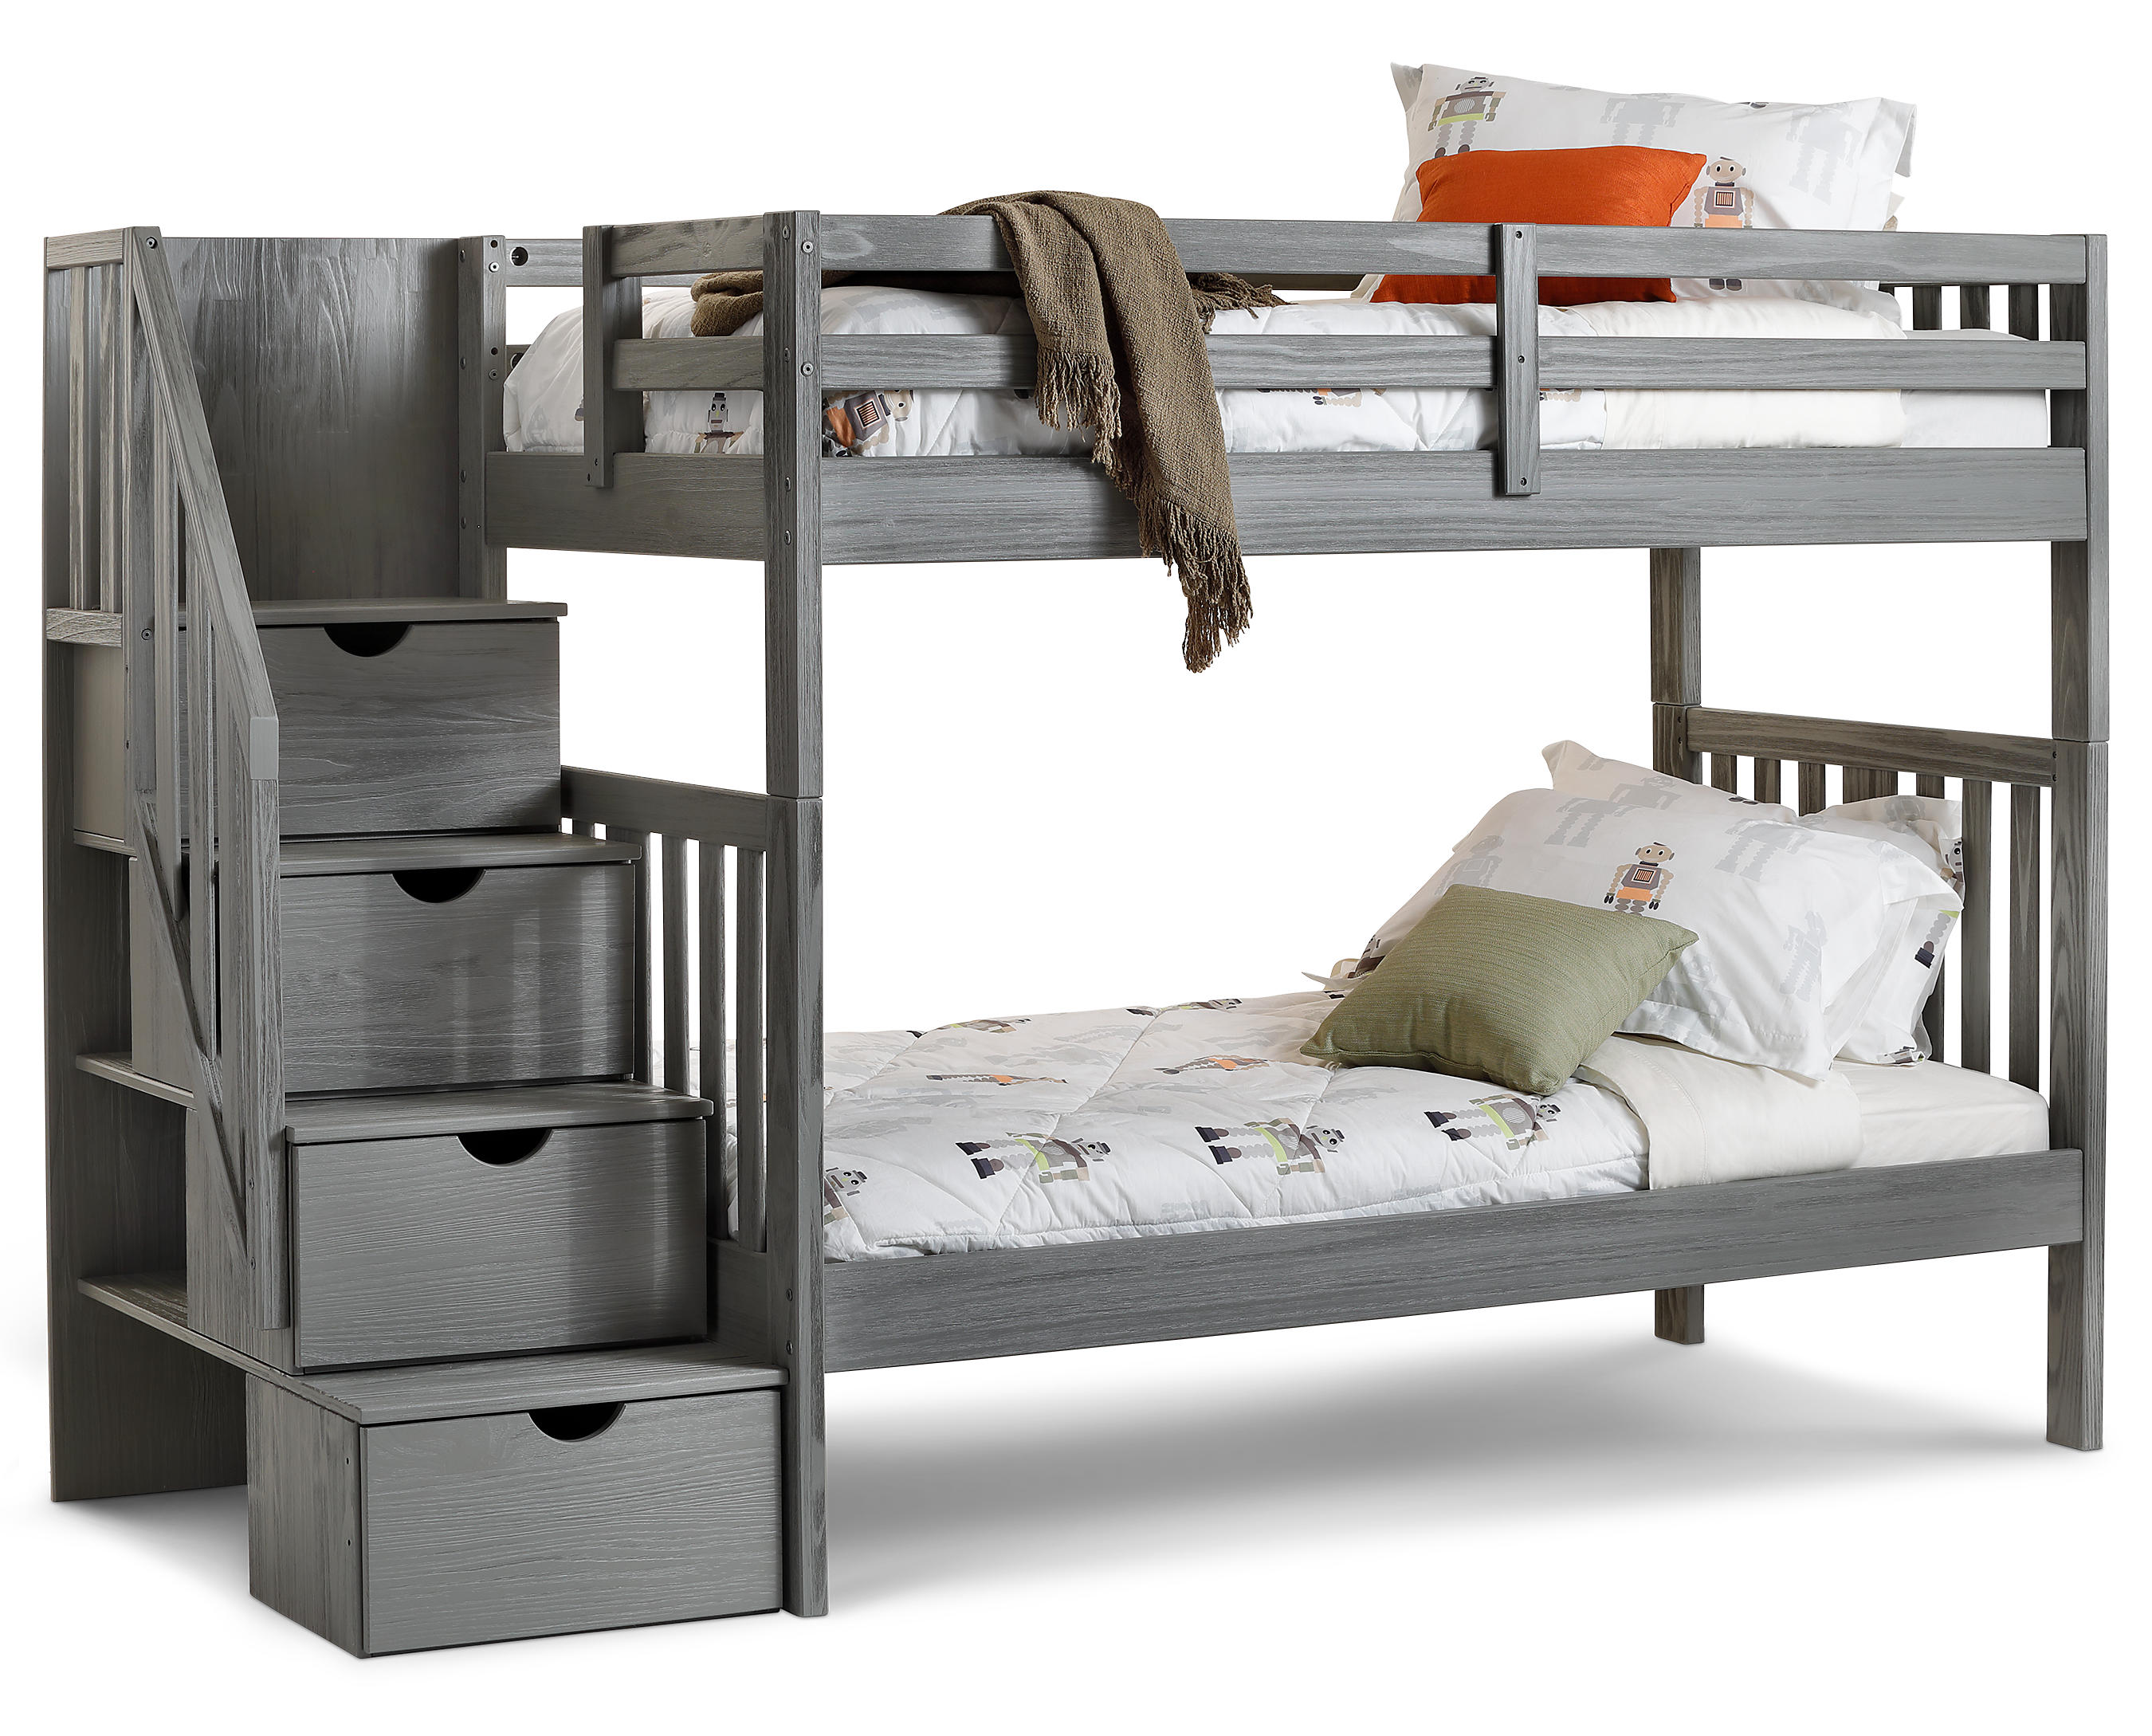 Dove Bunk Bed With Staircase, Full On Bunk Beds With Stairs